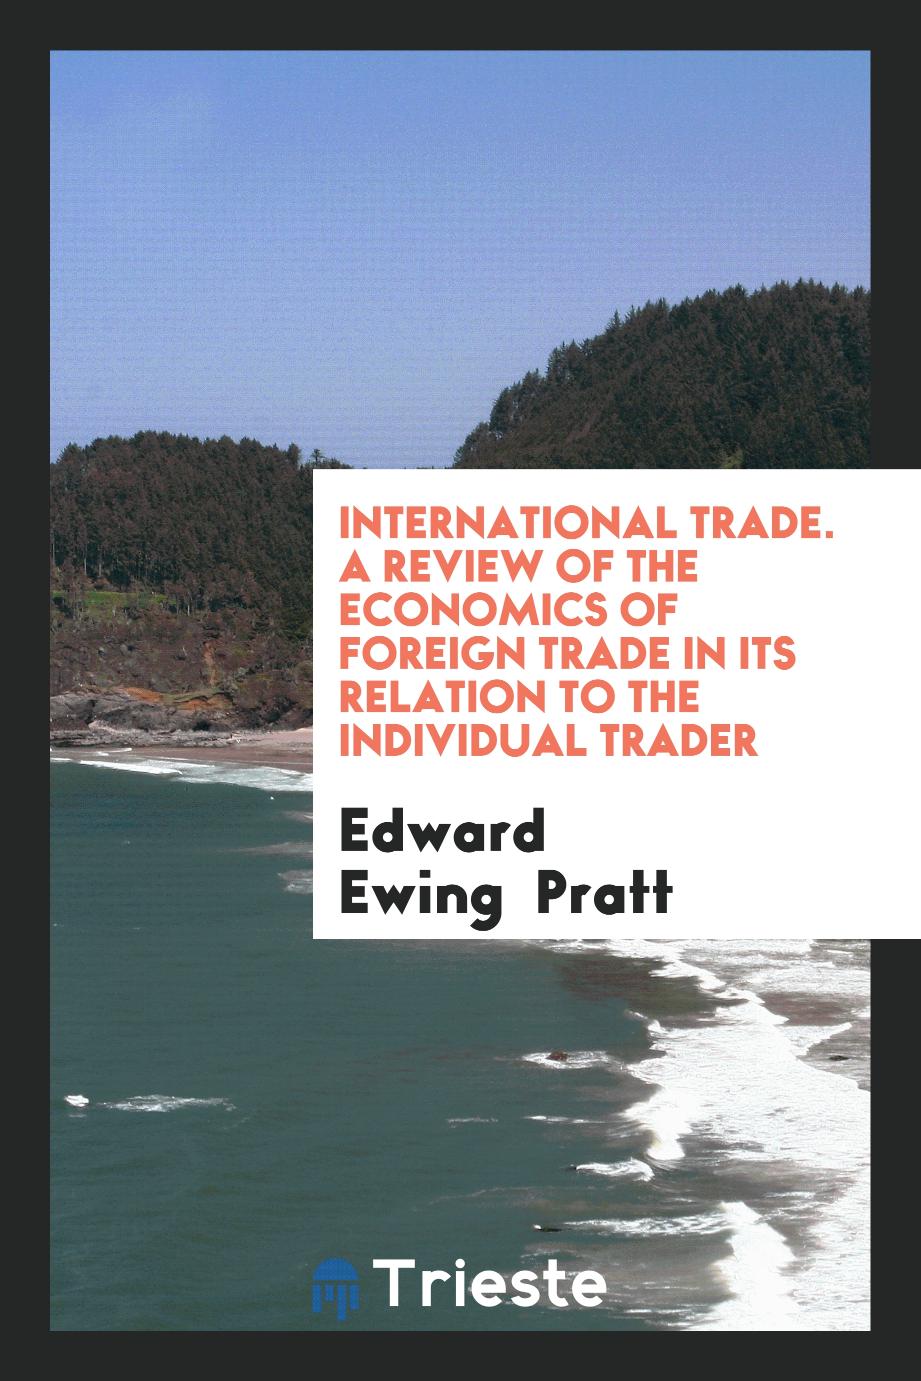 International Trade. A Review of the Economics of Foreign Trade in Its Relation to the Individual Trader